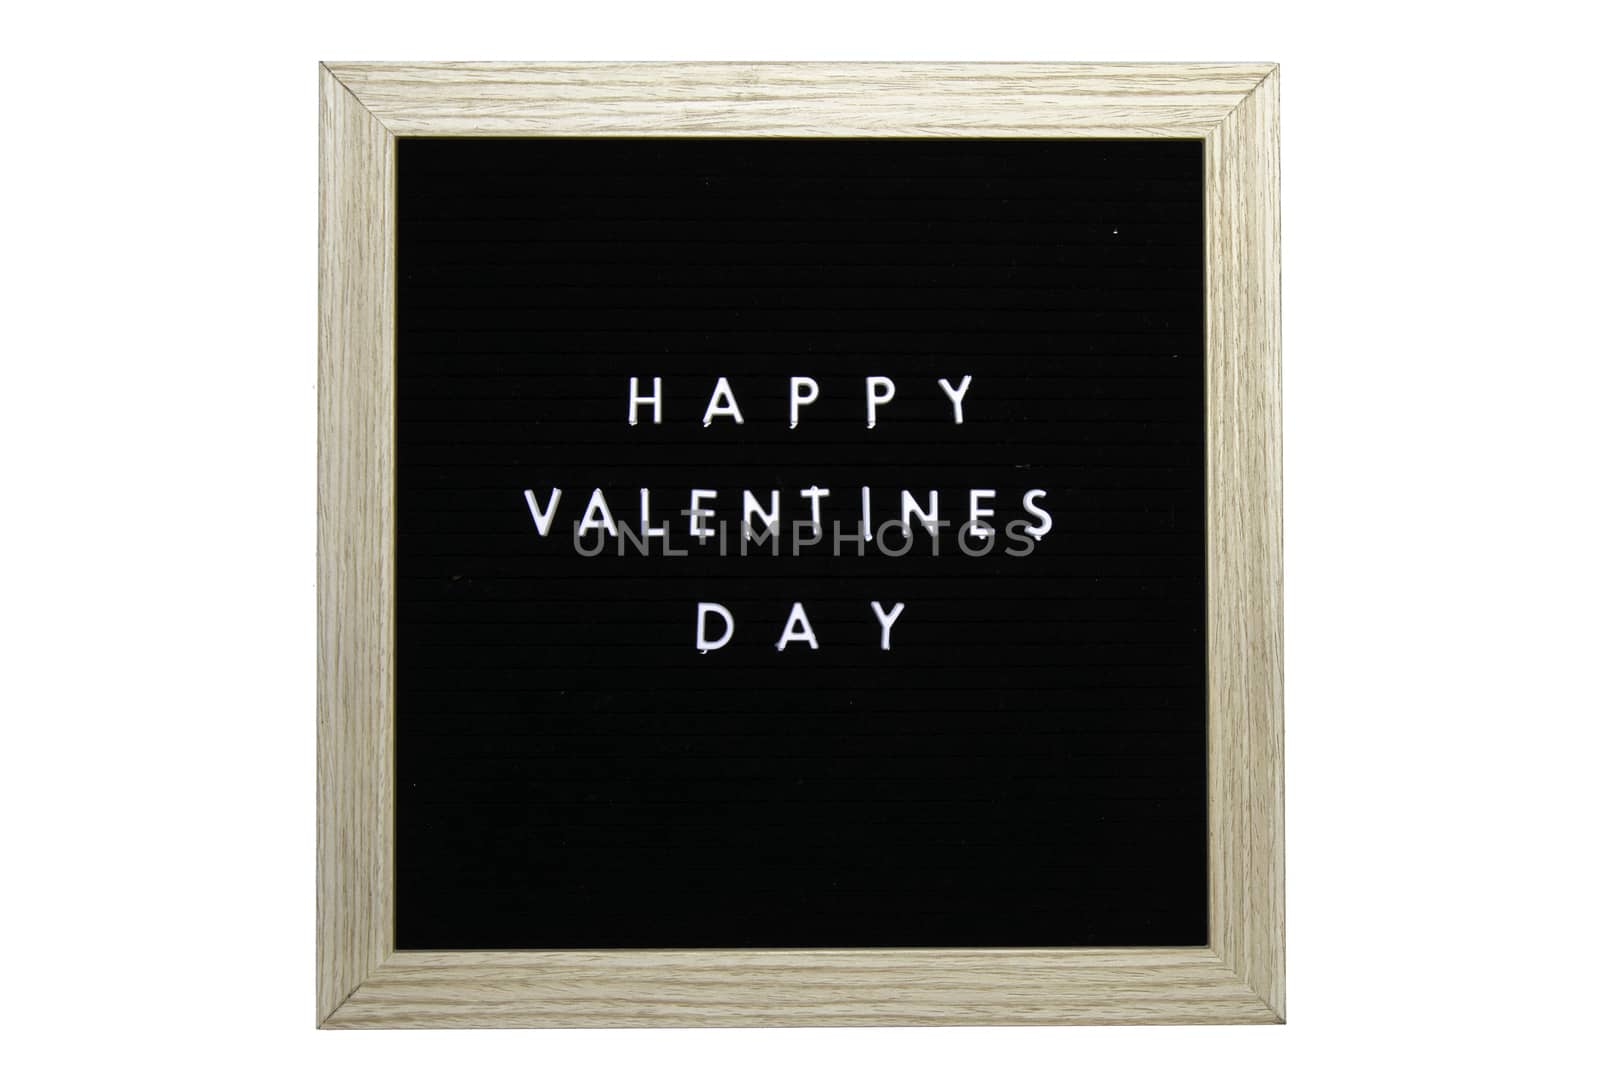 A Black Sign With a Birch Frame That Says Happy Valentines Day o by bju12290